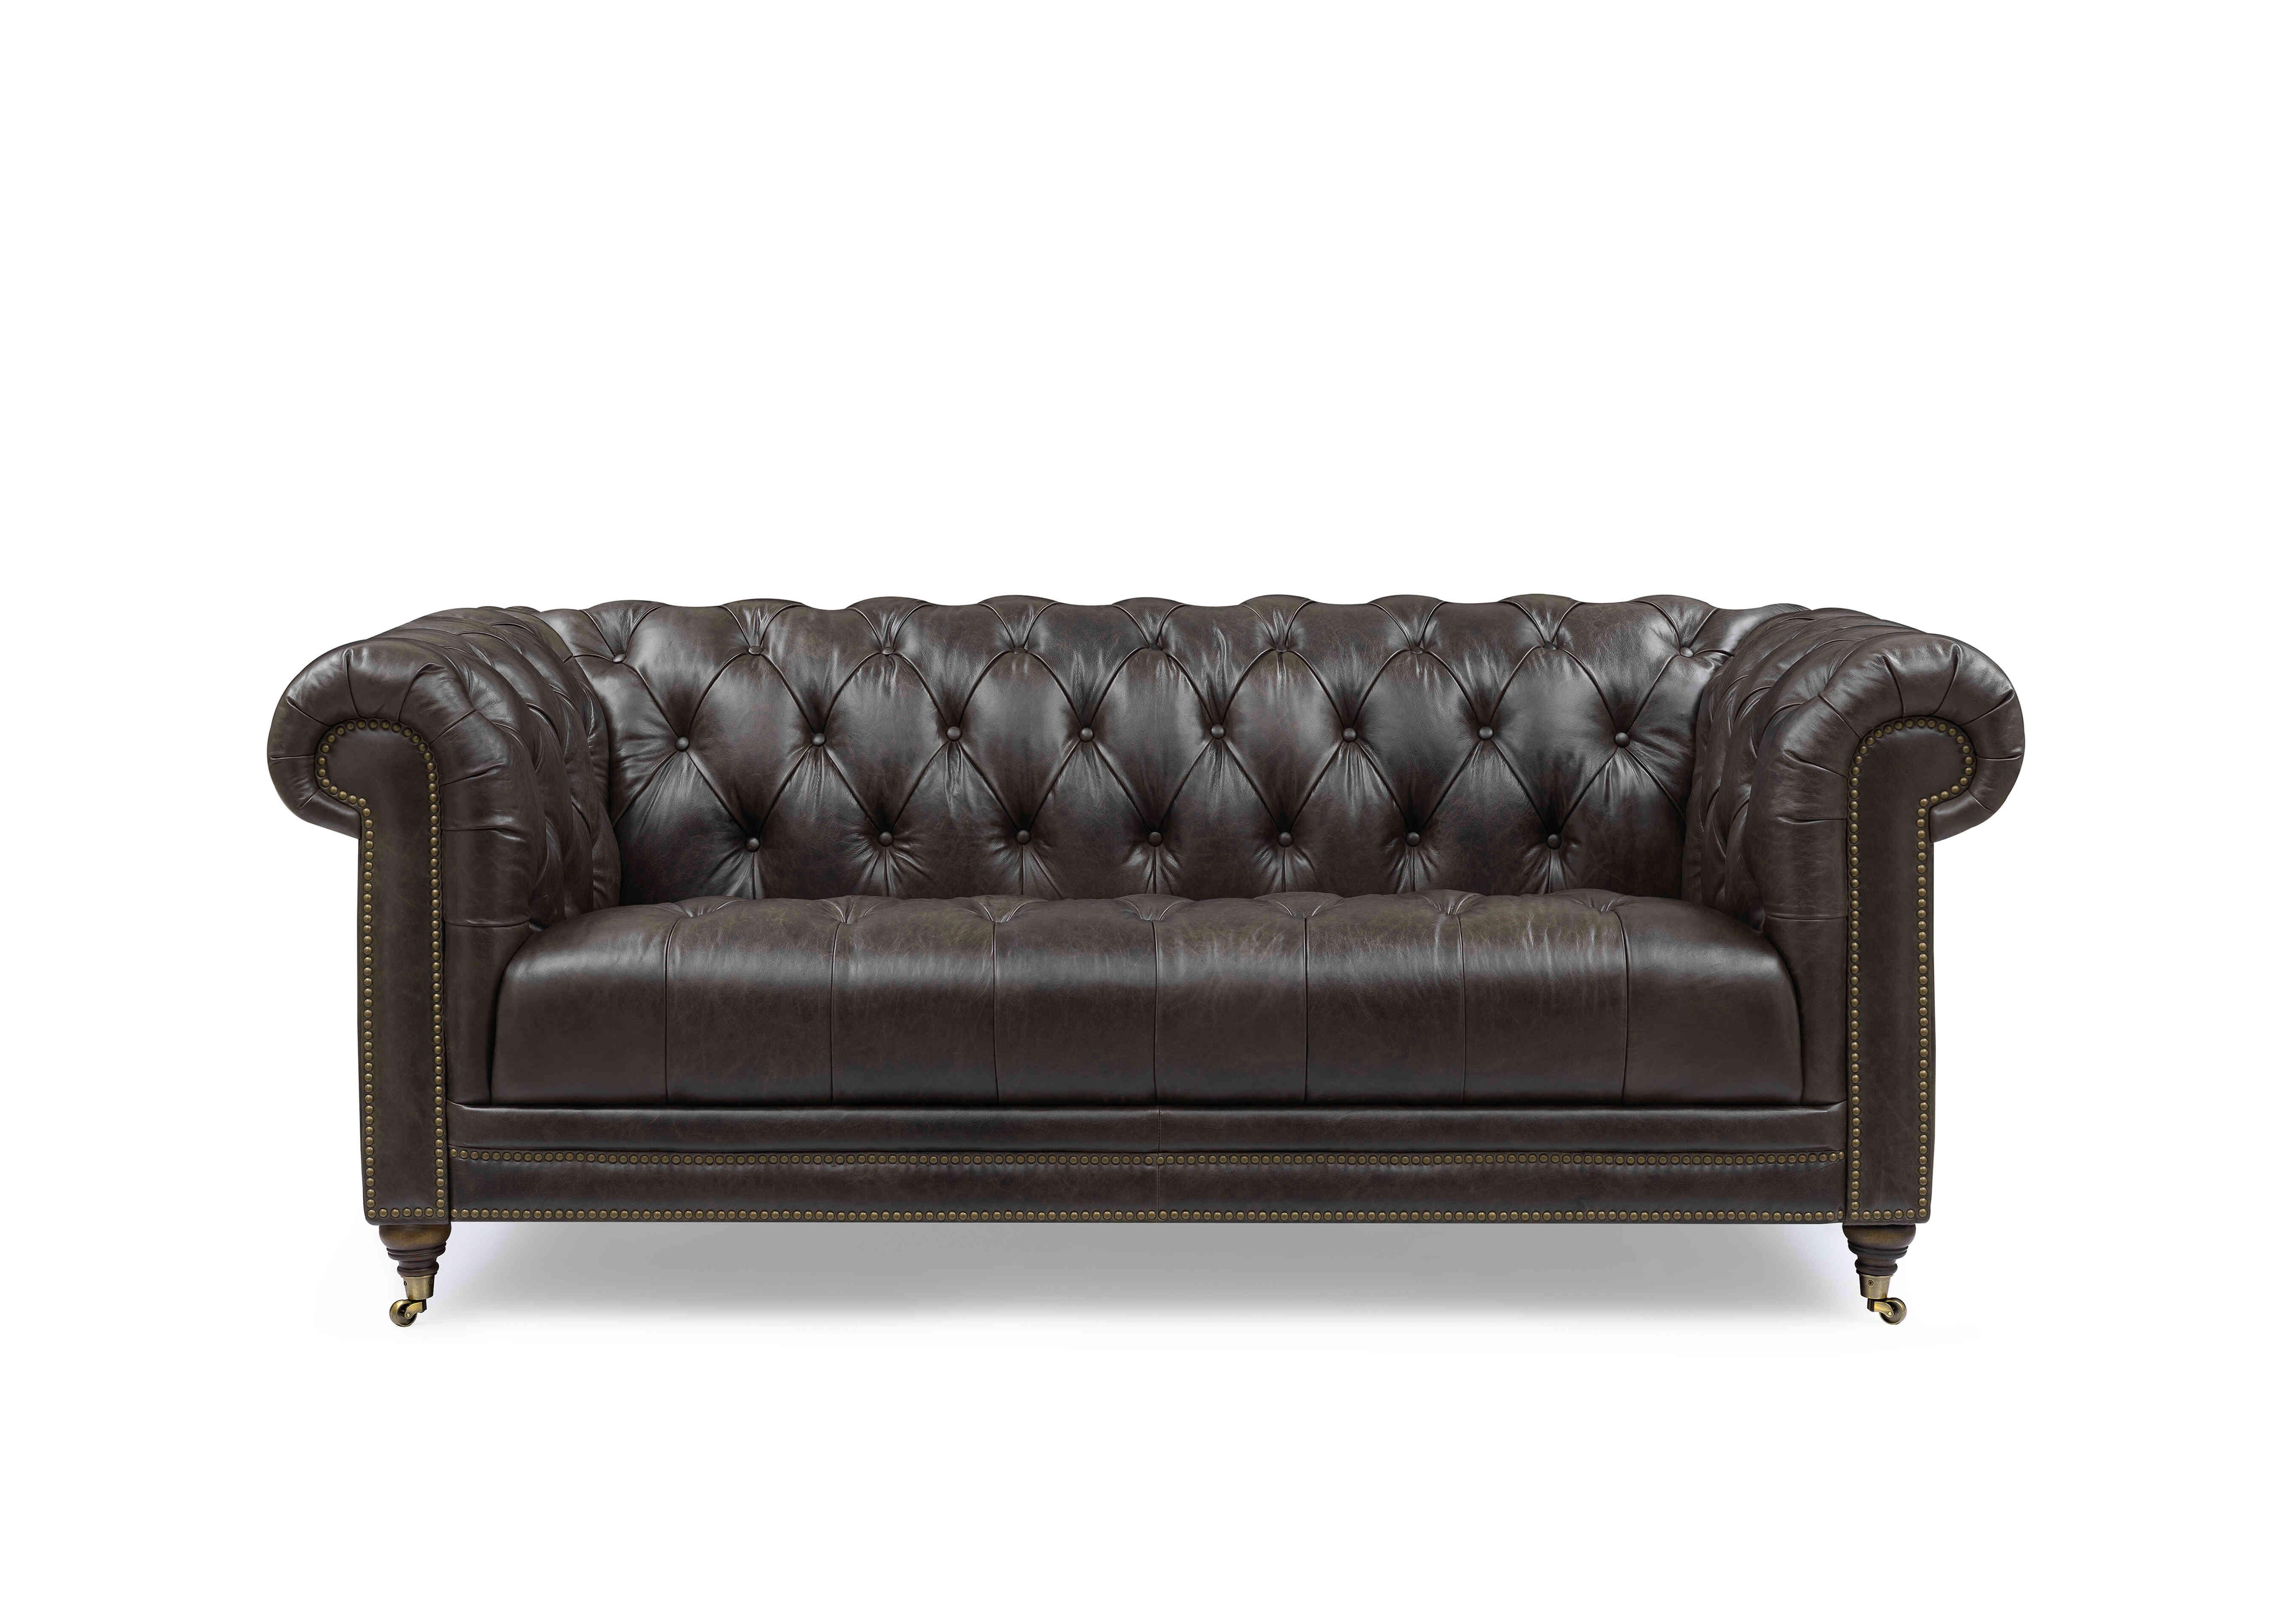 Walter 3 Seater Leather Chesterfield Sofa in X3y1-1759ls Cannon on Furniture Village